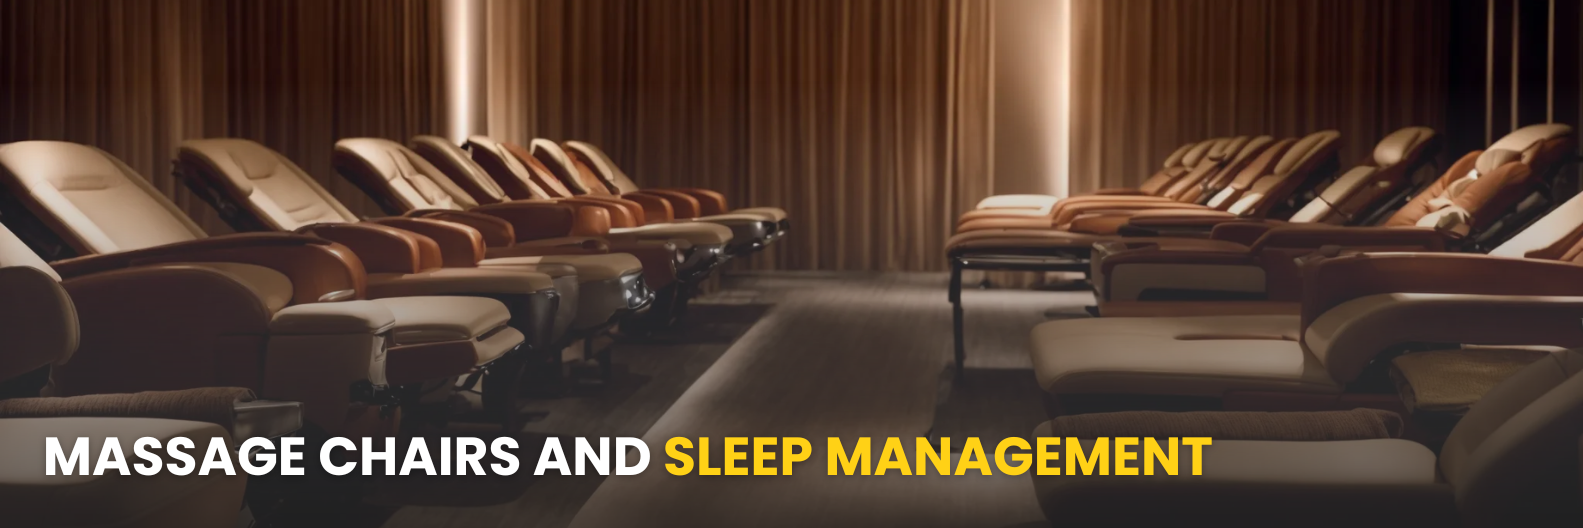 Unlock the potential of massage chairs to enhance healthy sleep cycles. Feel the transformative effects of chair massage therapy in achieving rejuvenating, restful sleep.